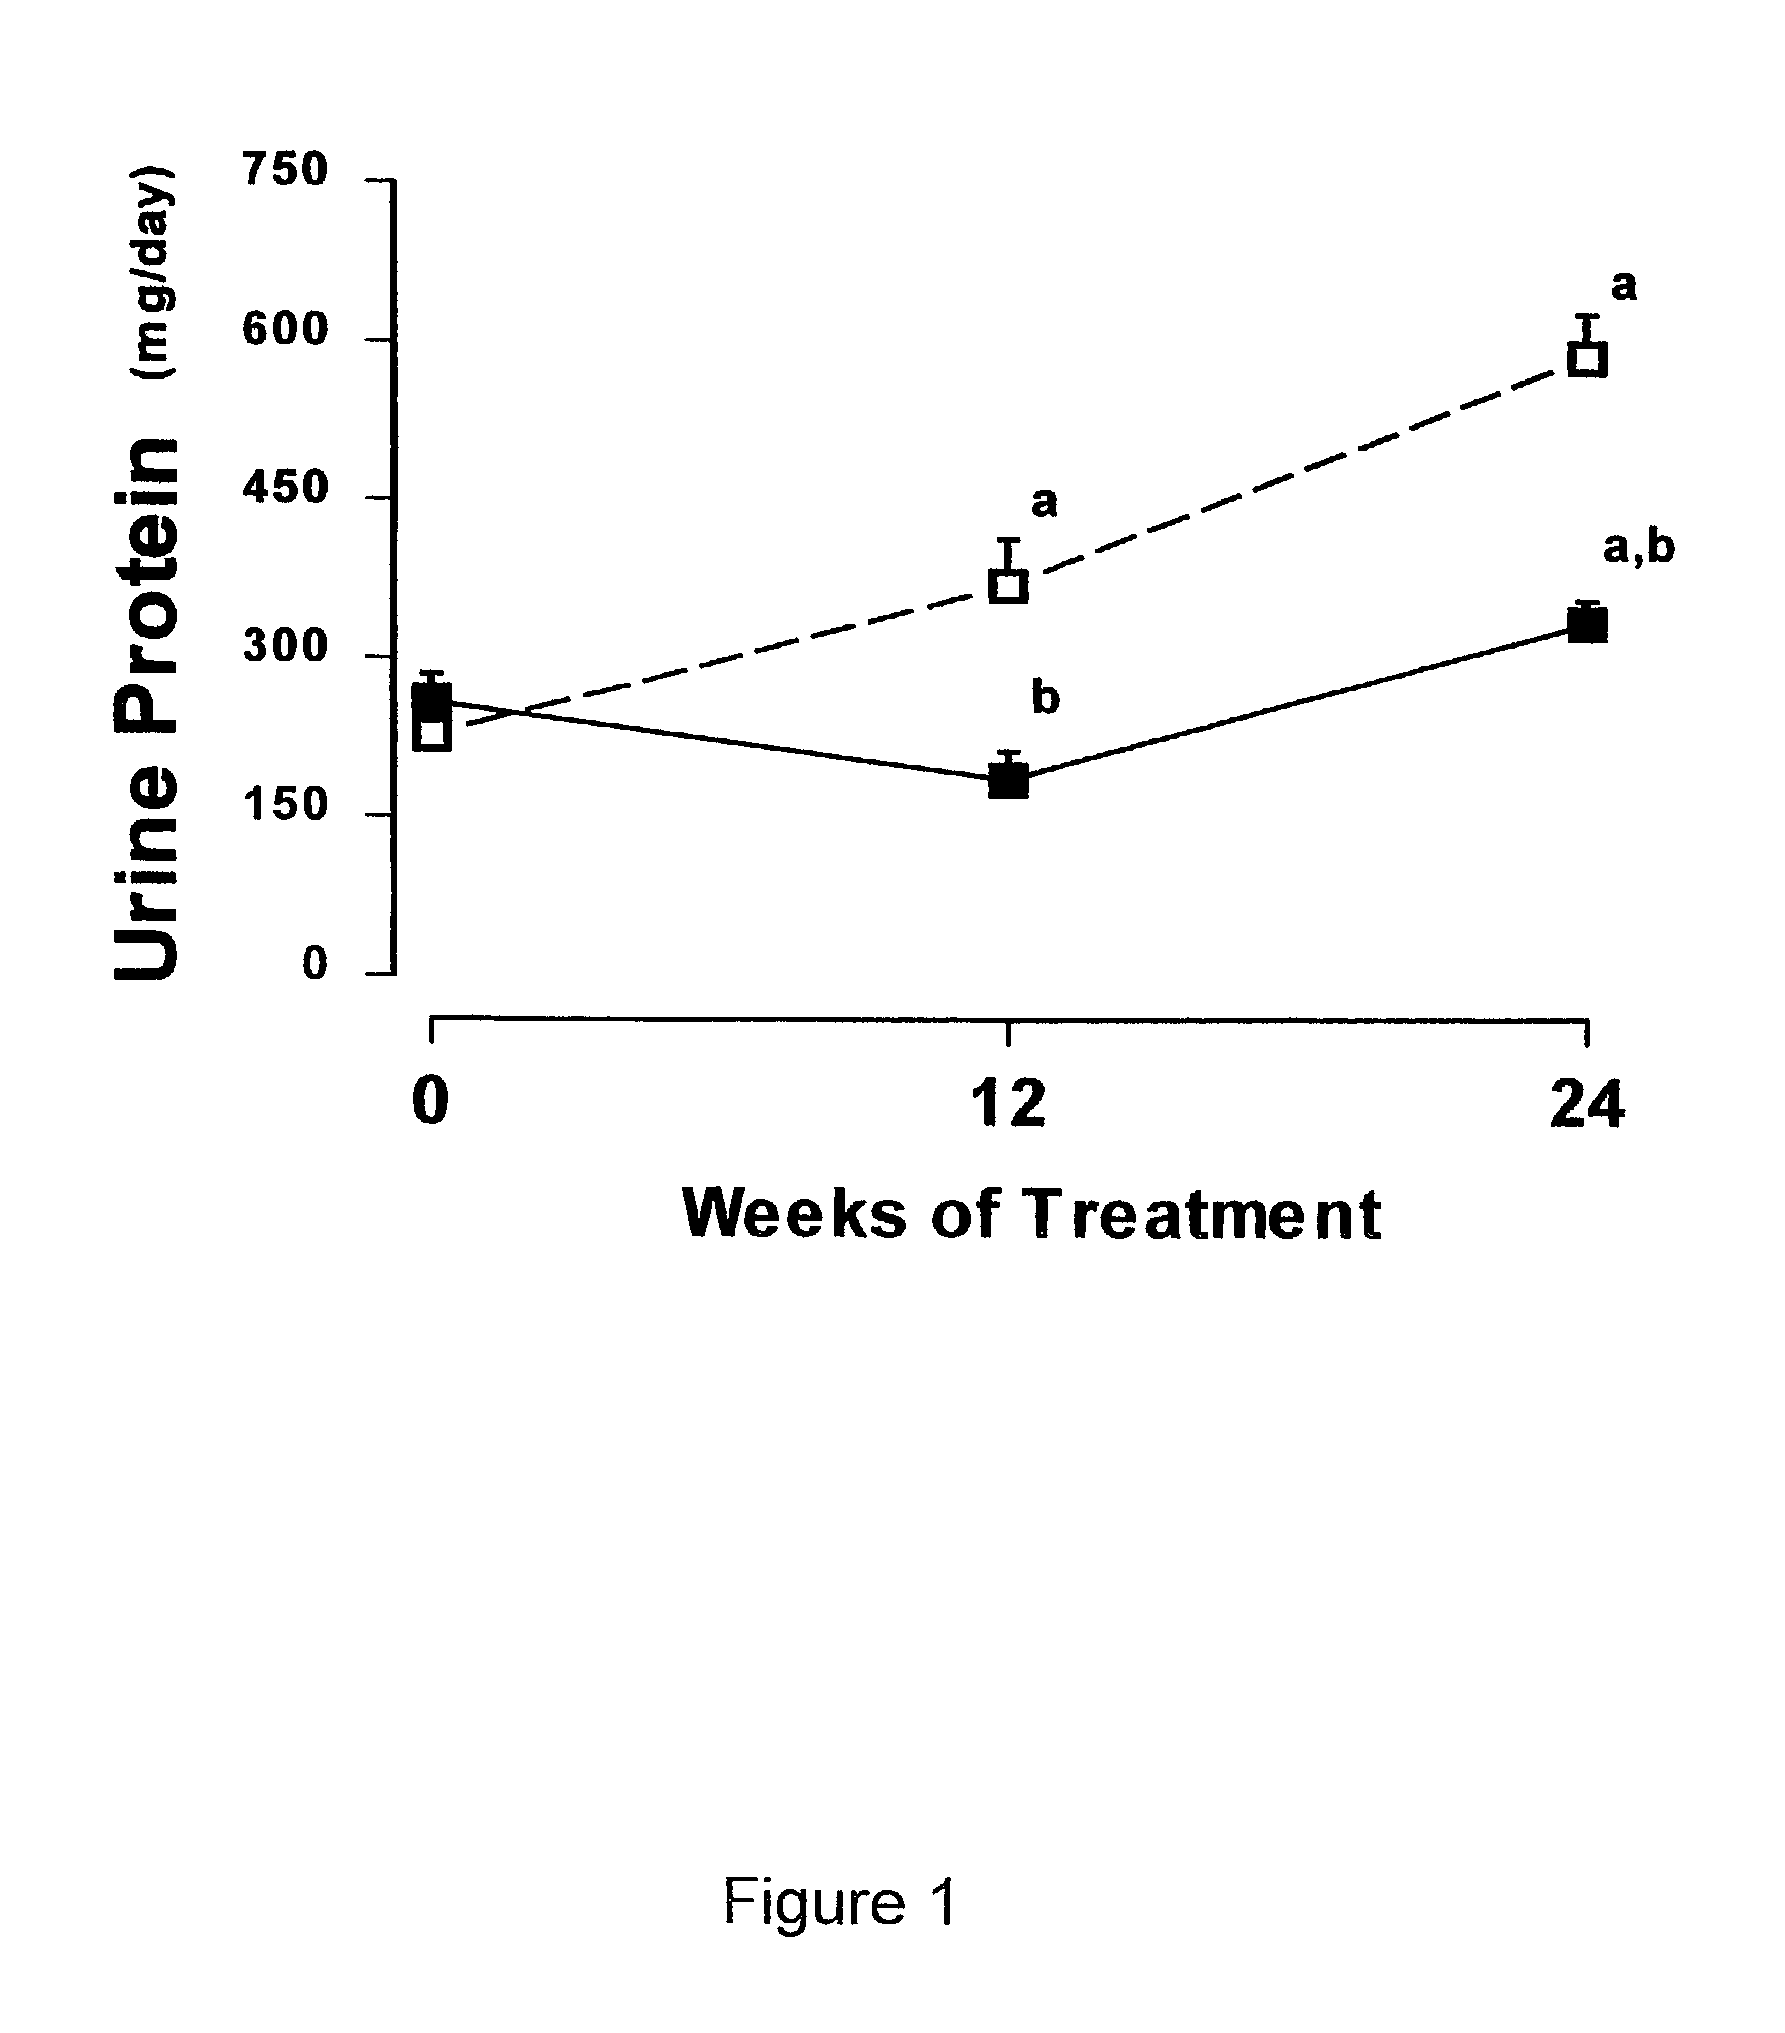 Administration of estradiol metabolites for the treatment or prevention of obesity, metabolic syndrome, diabetes, and vascular and renal disorders